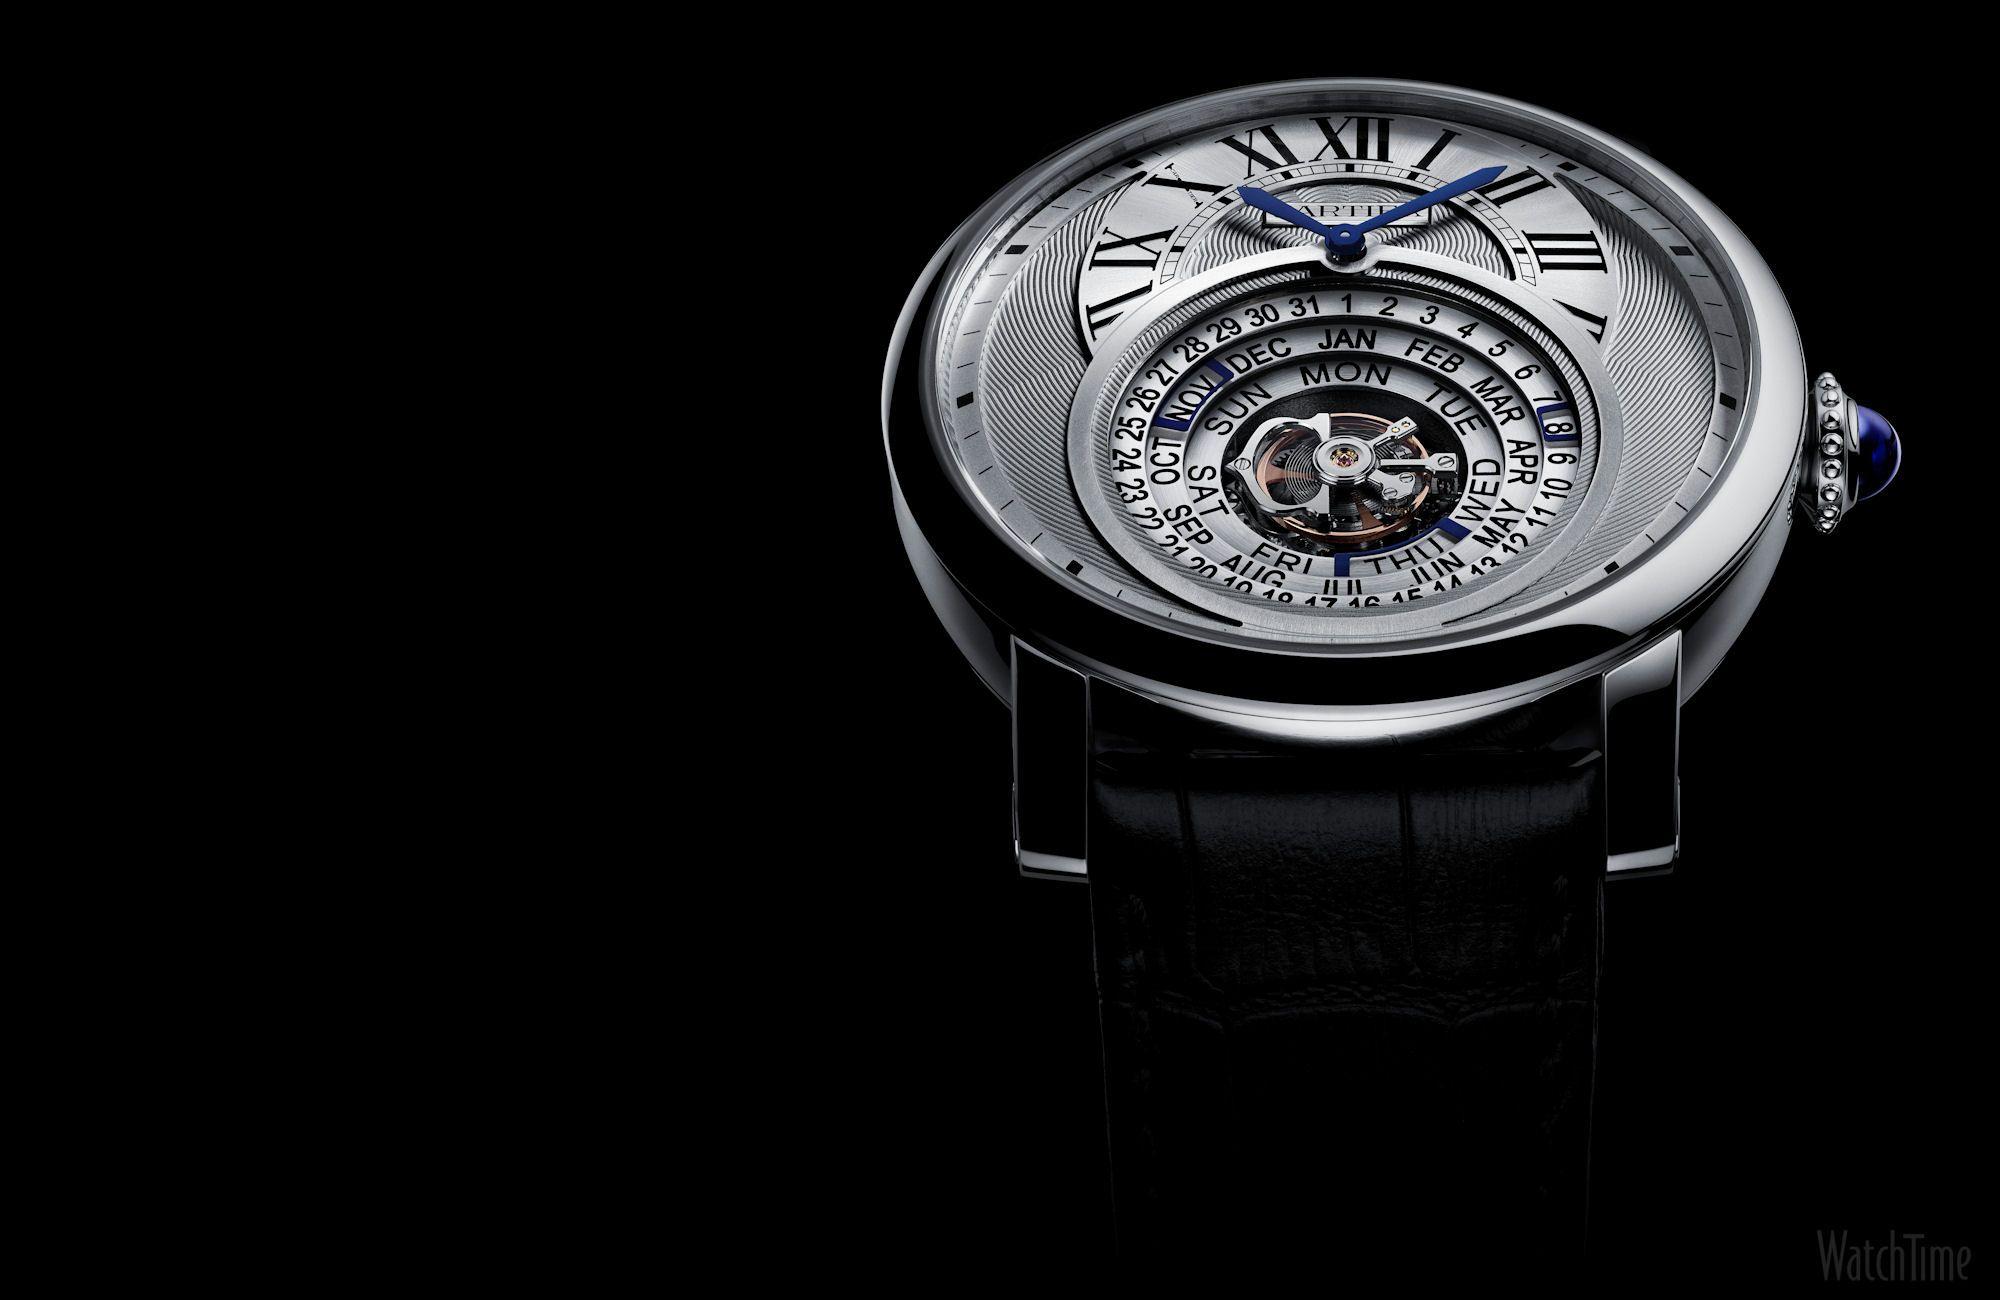 Watch Wallpaper: 11 Cartier Watches from SIHH. WatchTime's